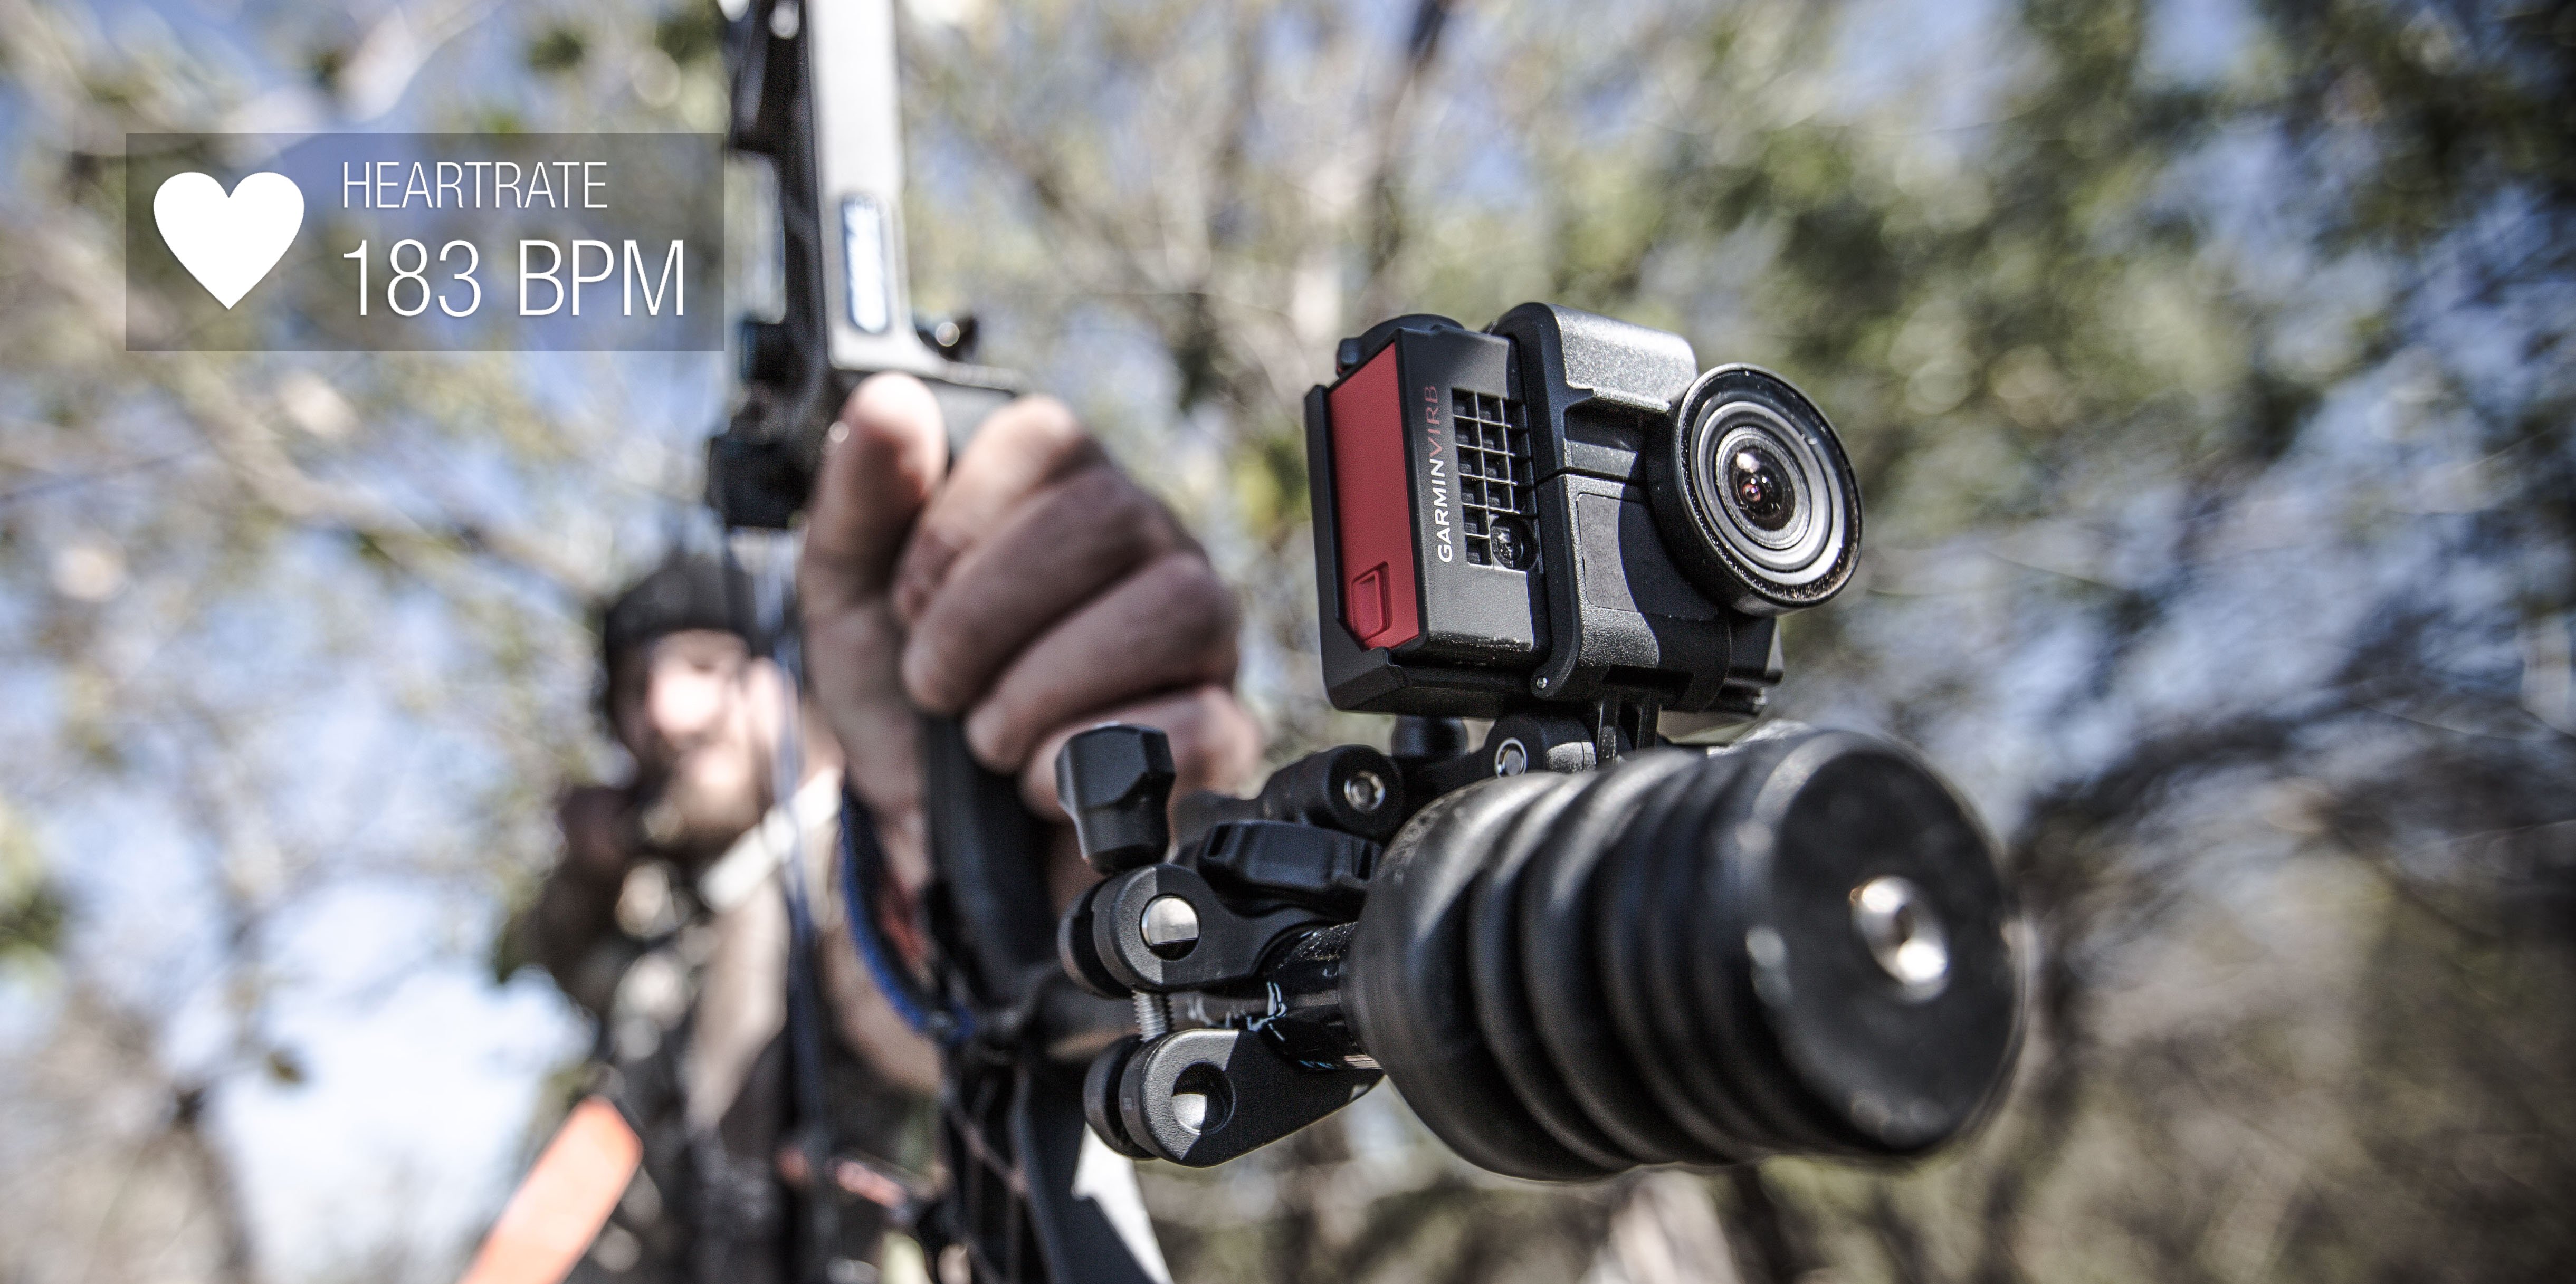 garmin-virb-ultra-30-action-camera-bowhunting-holiday-gift-ideas-for-outdoorsmen